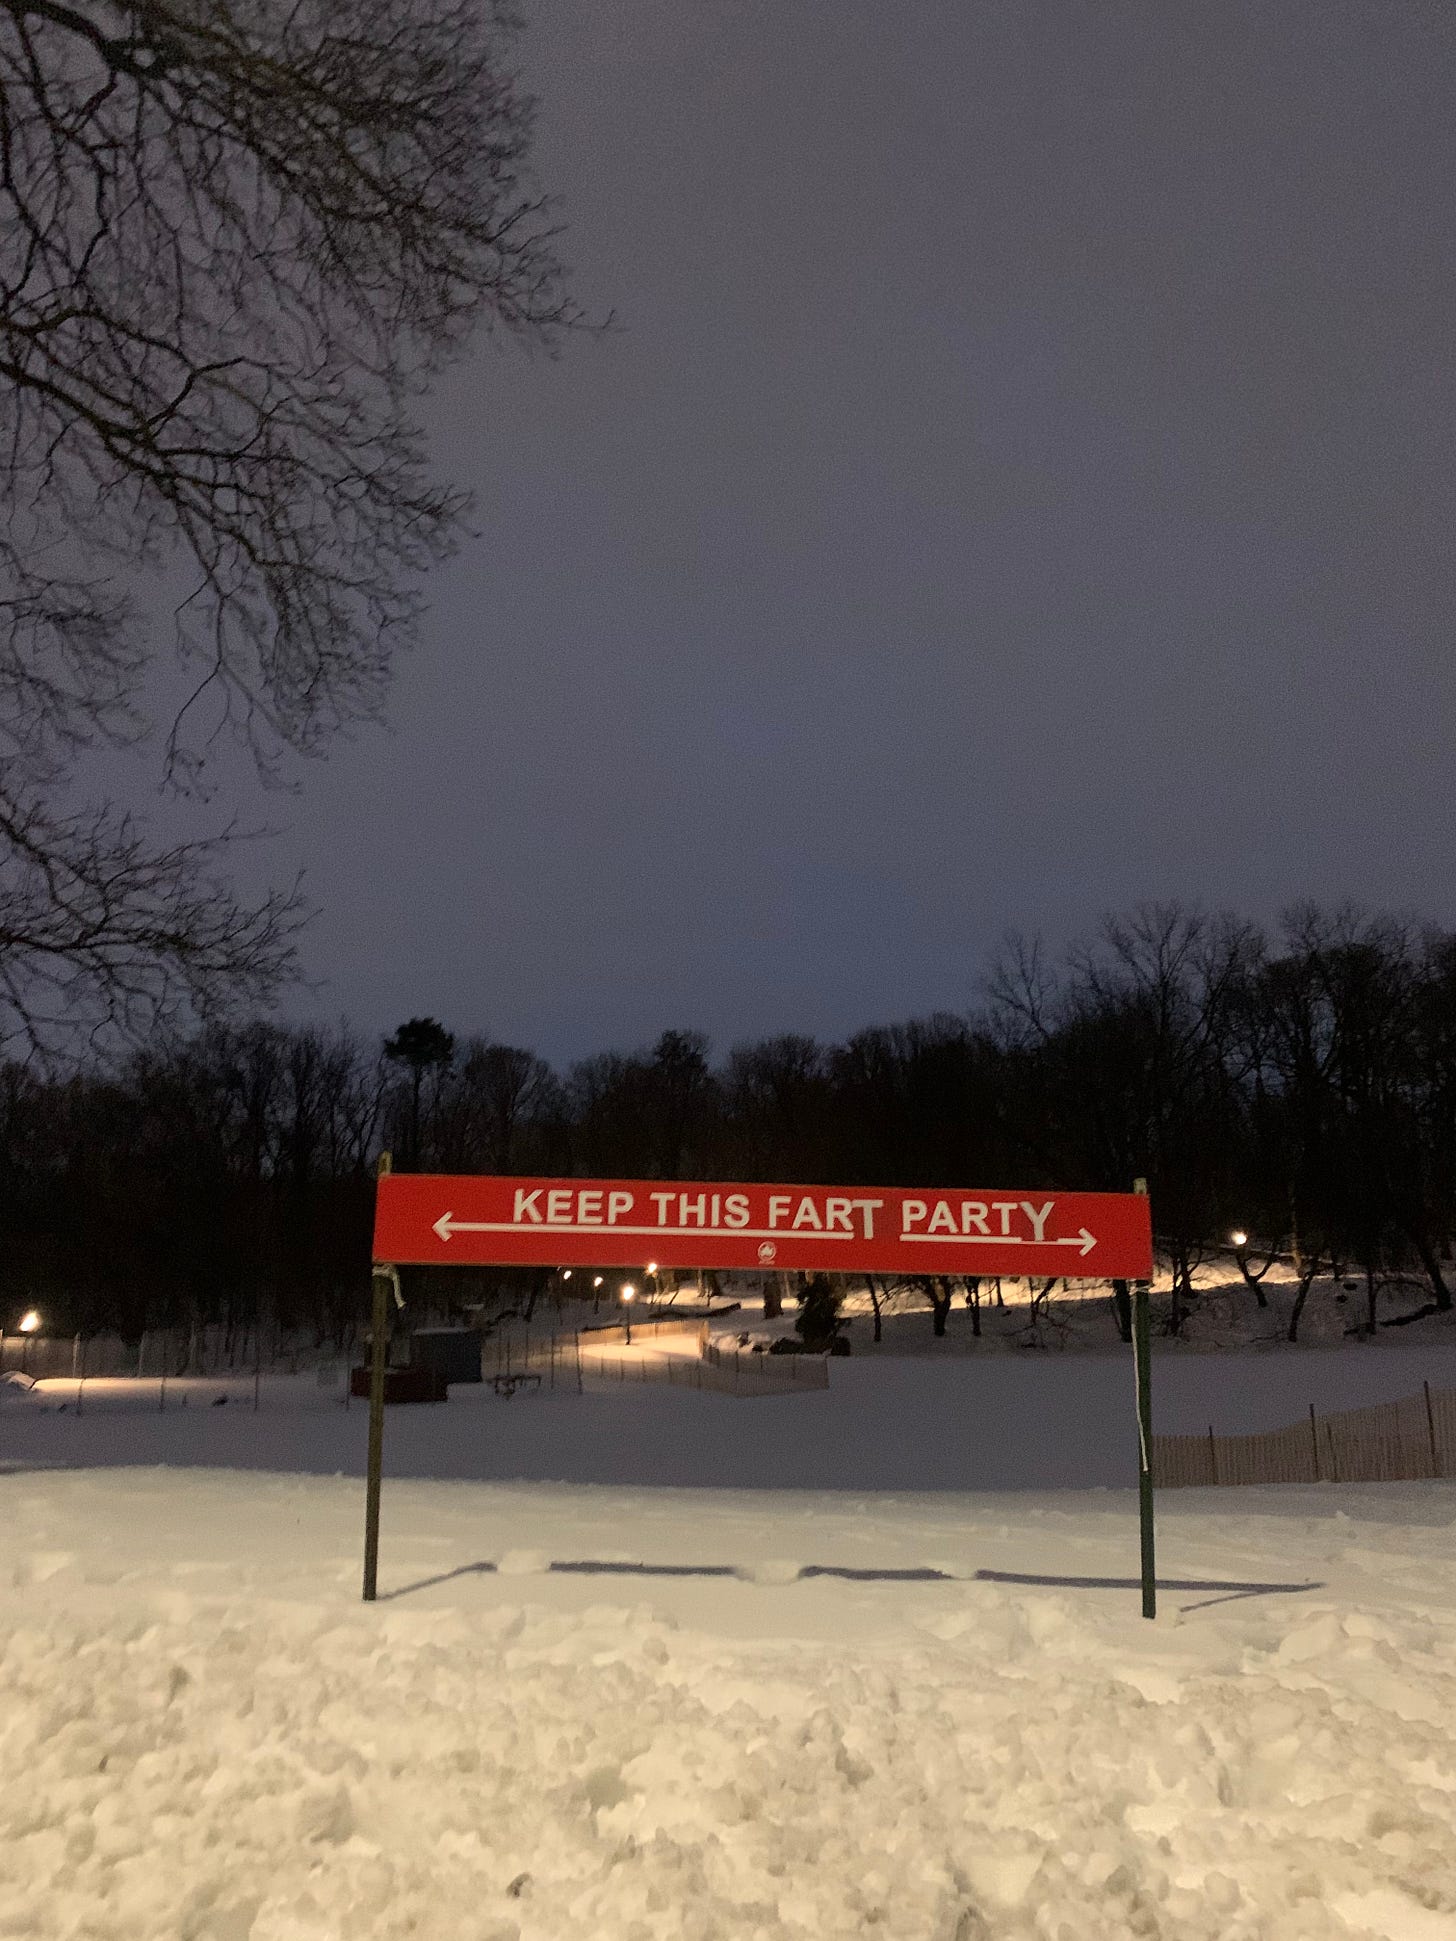 A sign in a snowy park changed from "Keep this far apart" to instead read "Keep this fart party"